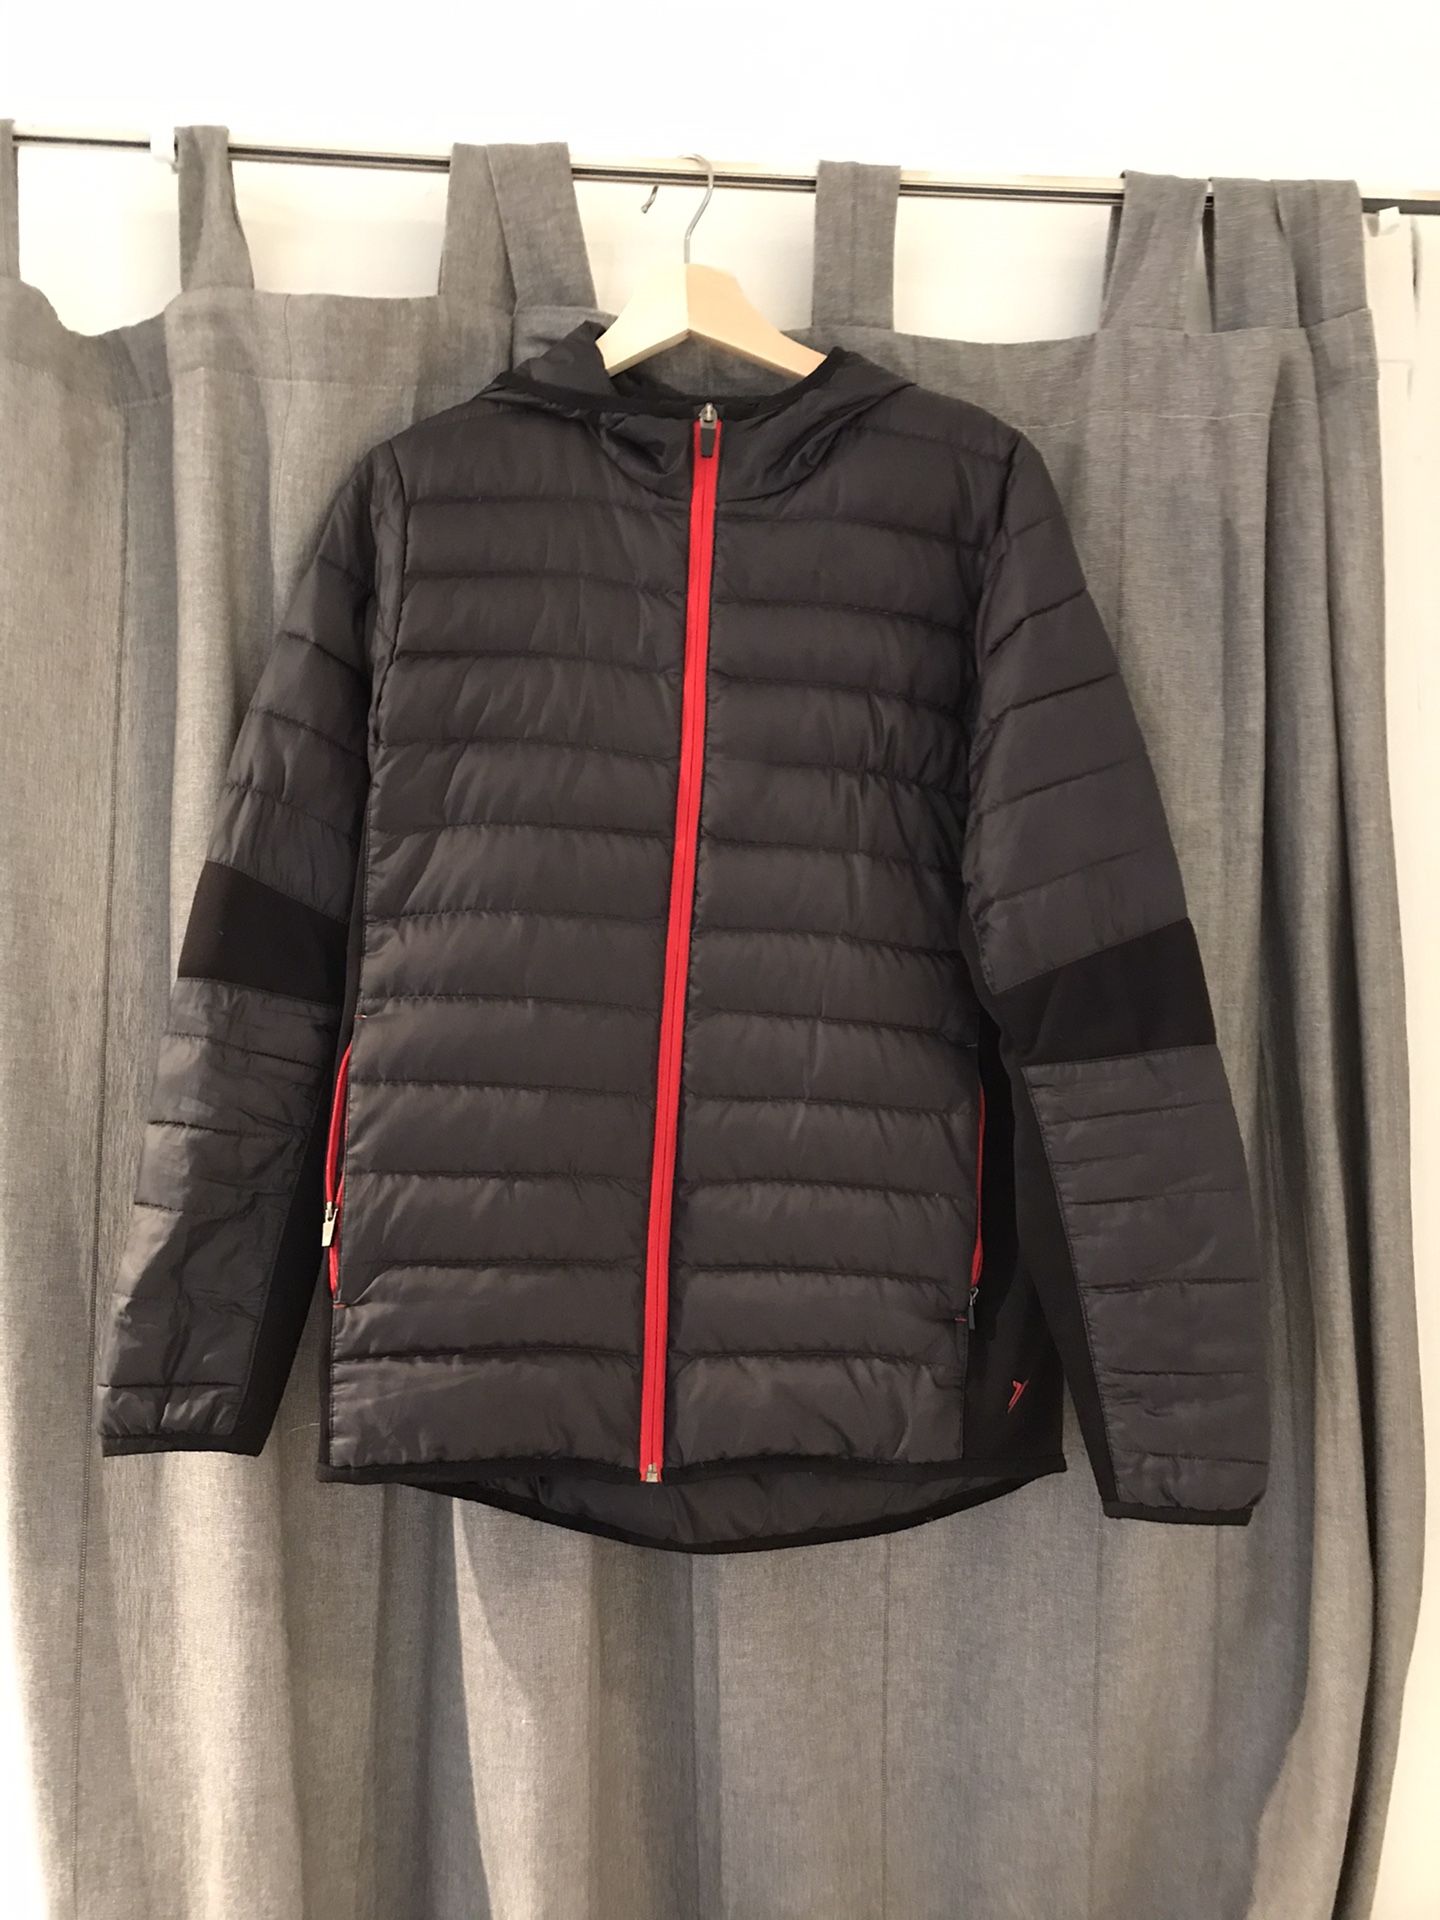 Old Navy Active Jacket size S/P